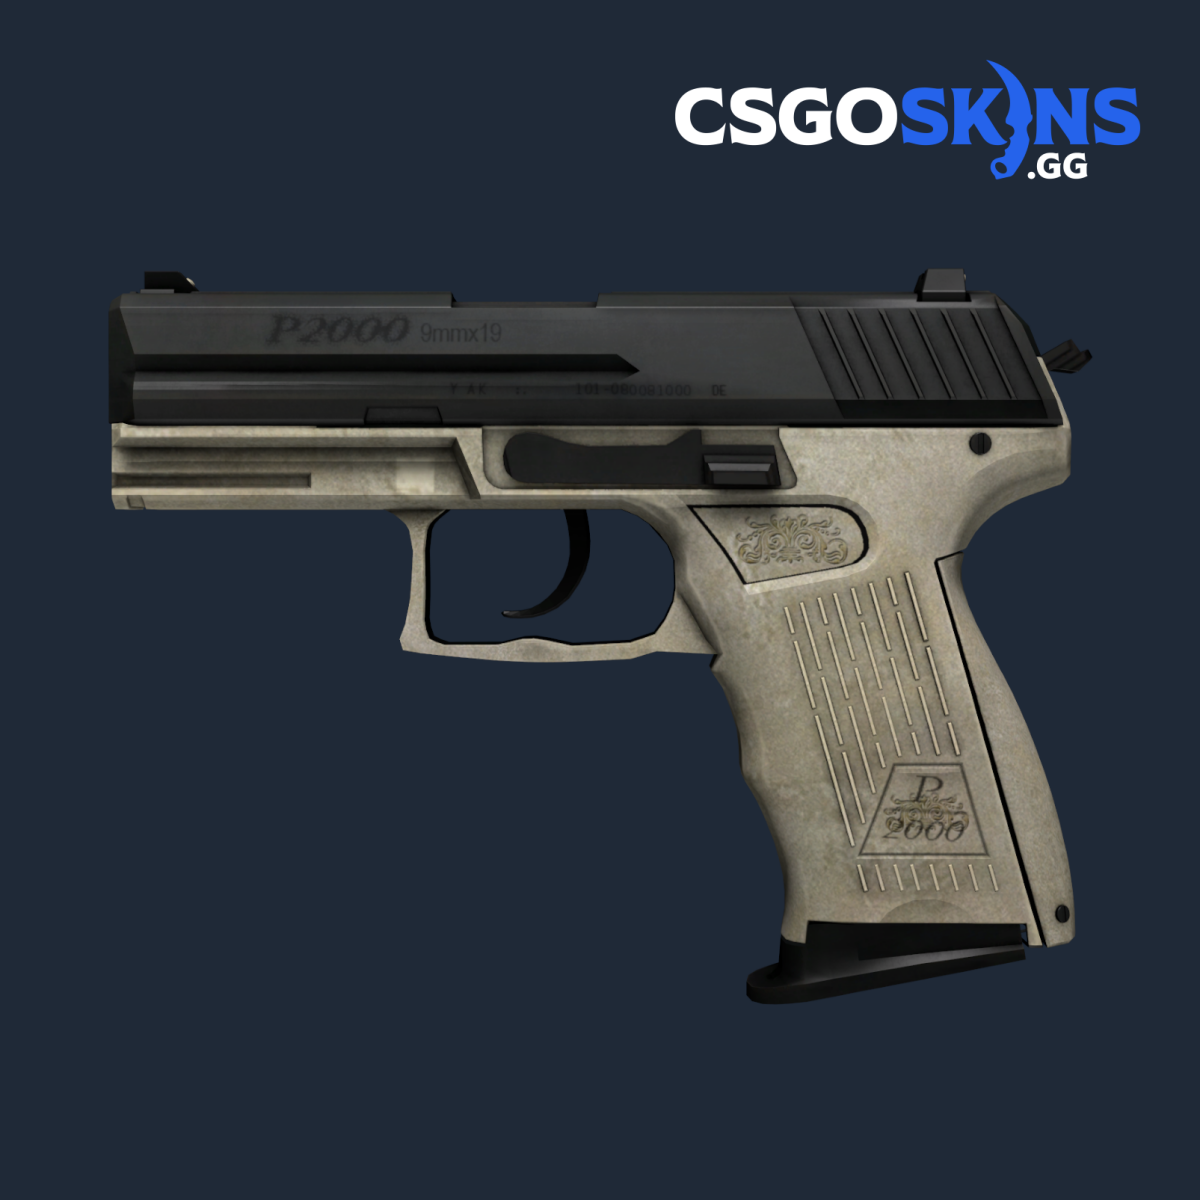 download the last version for ios P2000 Ivory cs go skin